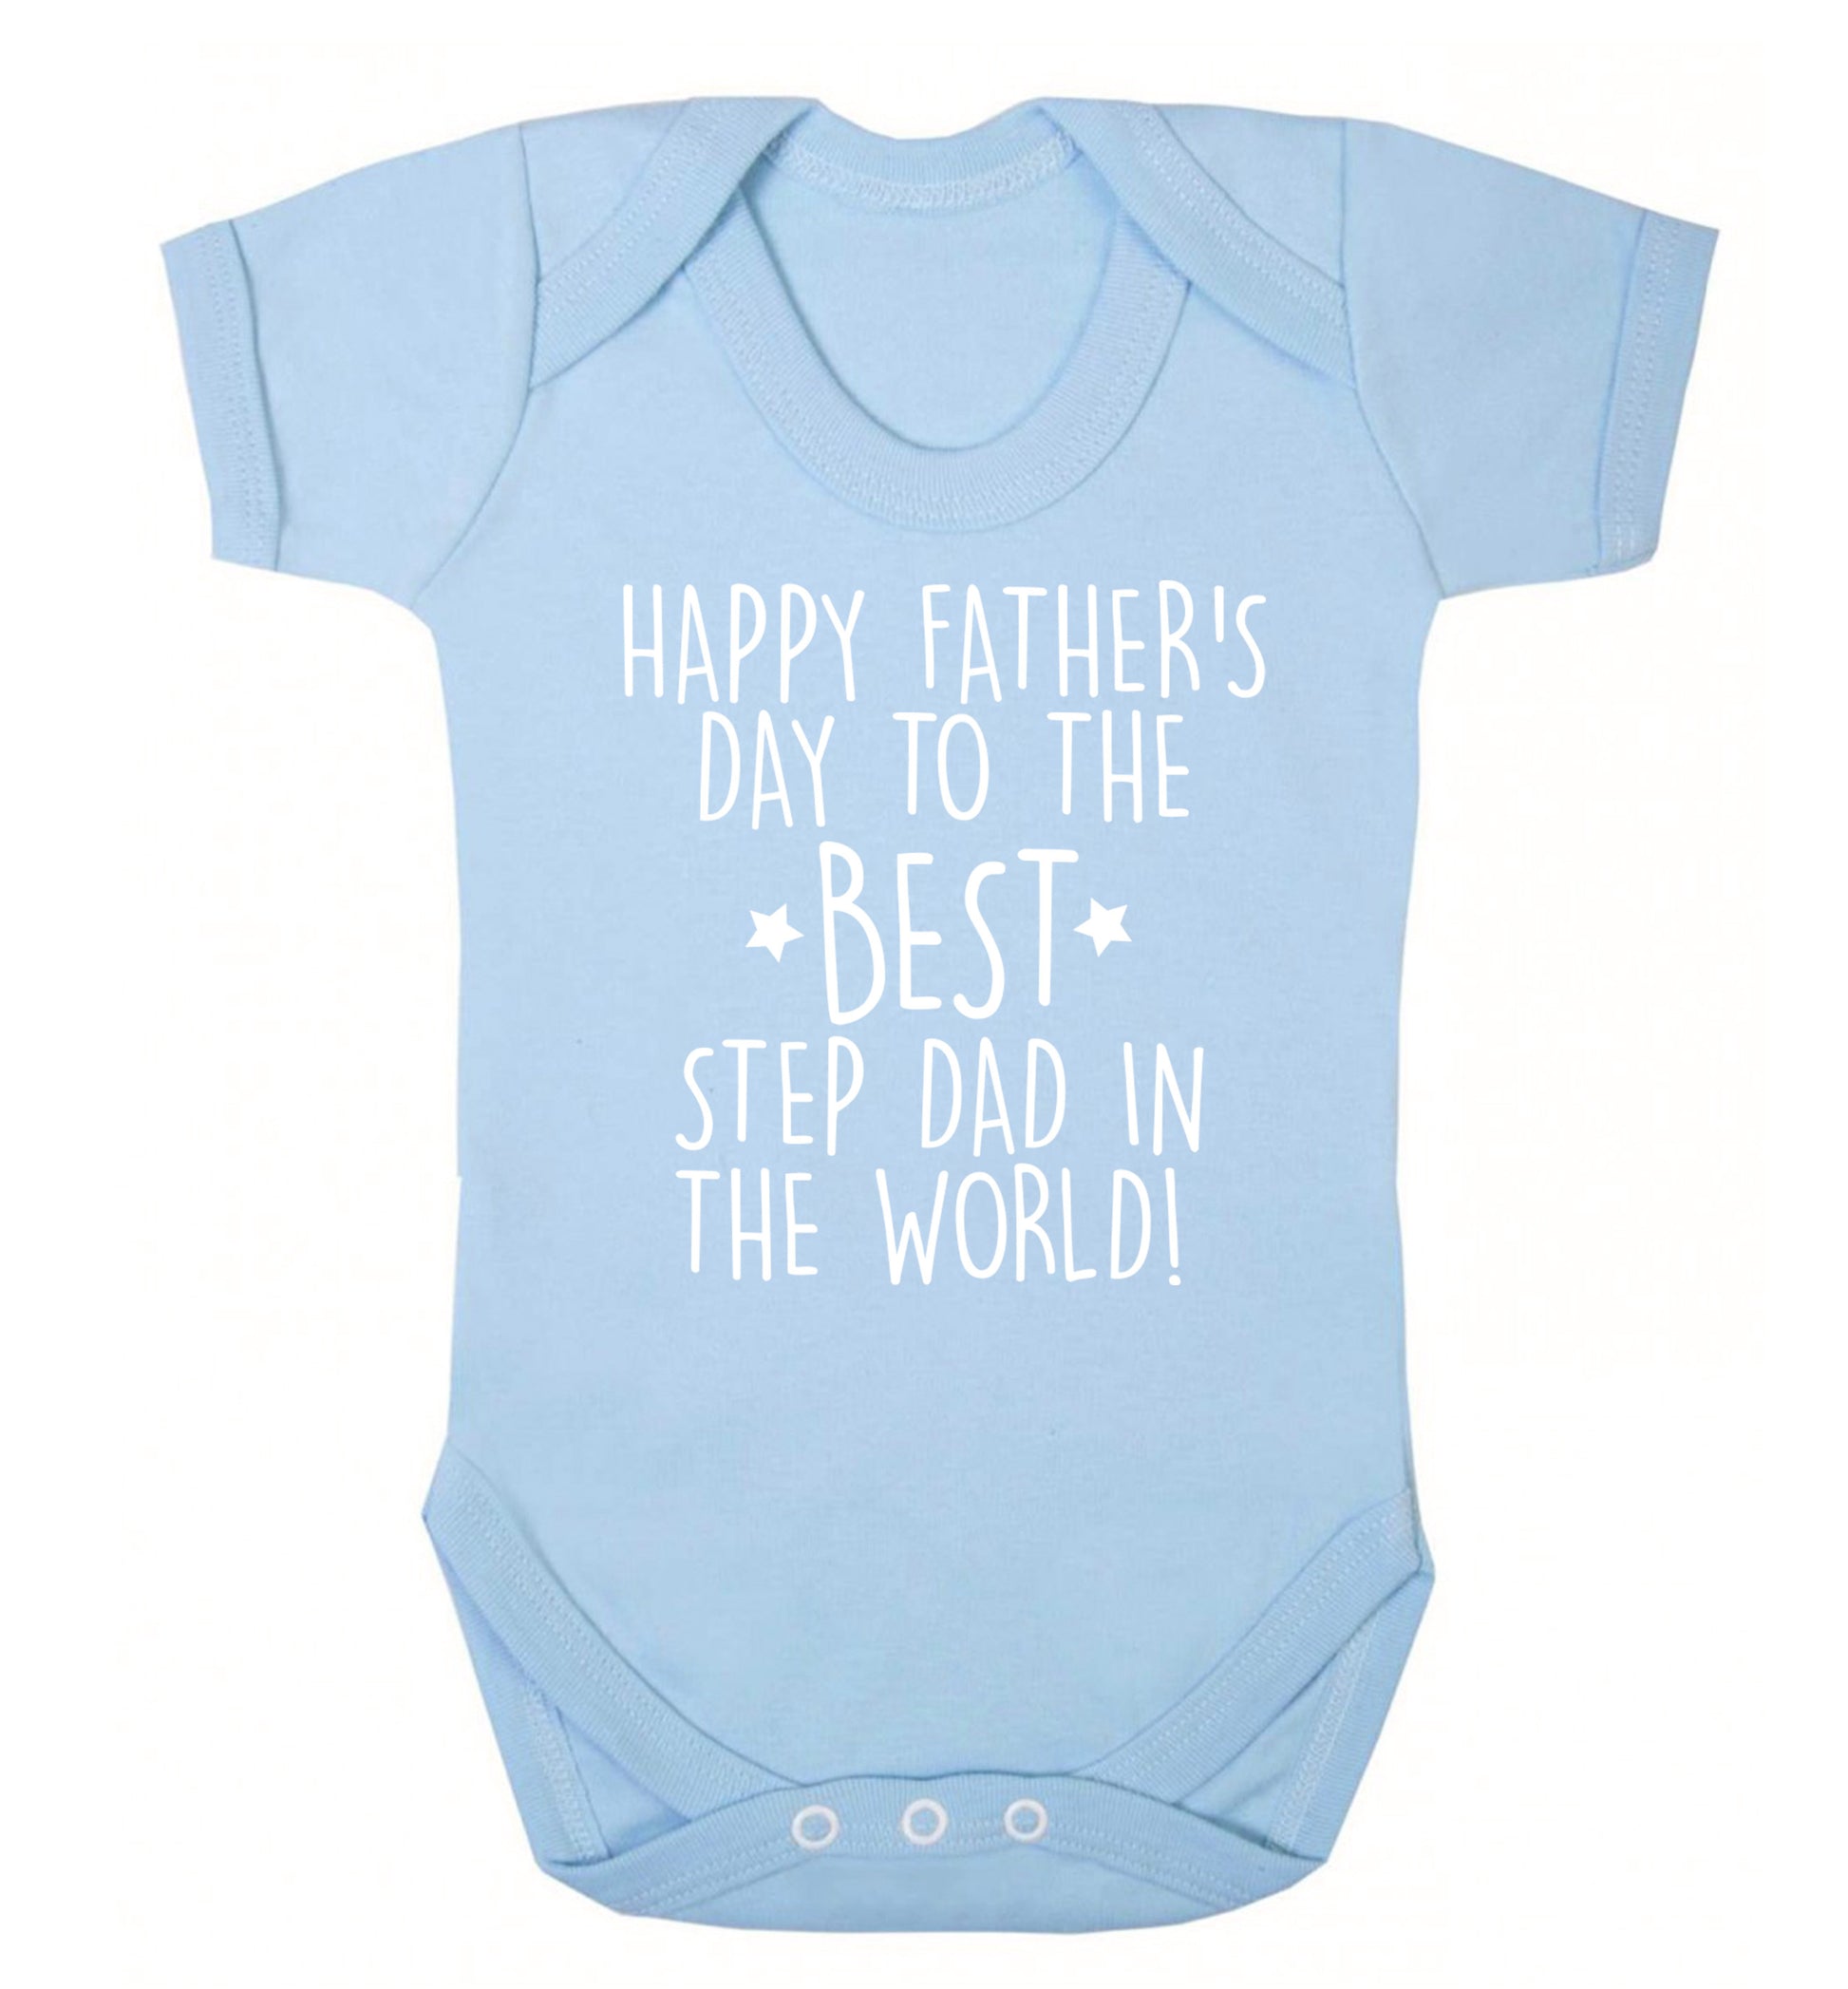 Happy Father's day to the best step dad in the world! Baby Vest pale blue 18-24 months